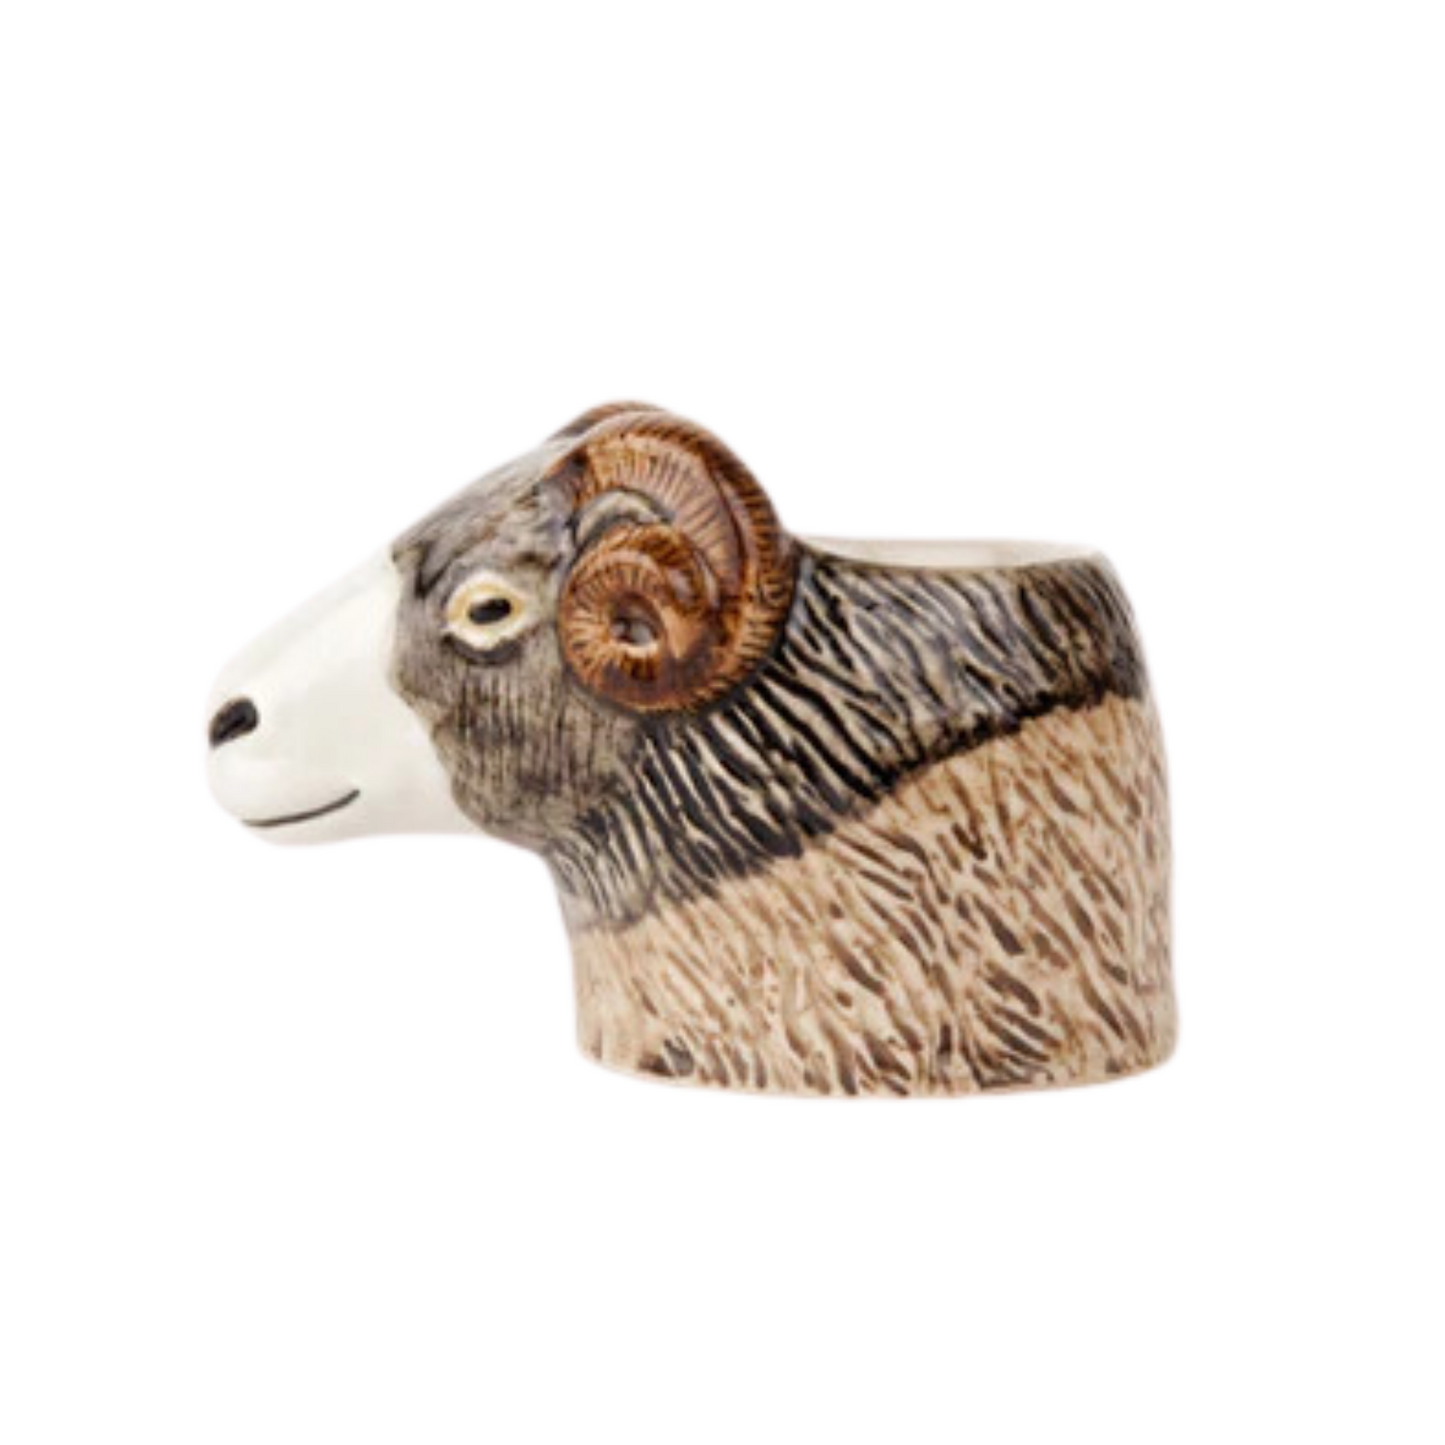 Swaledale Sheep Egg Cup